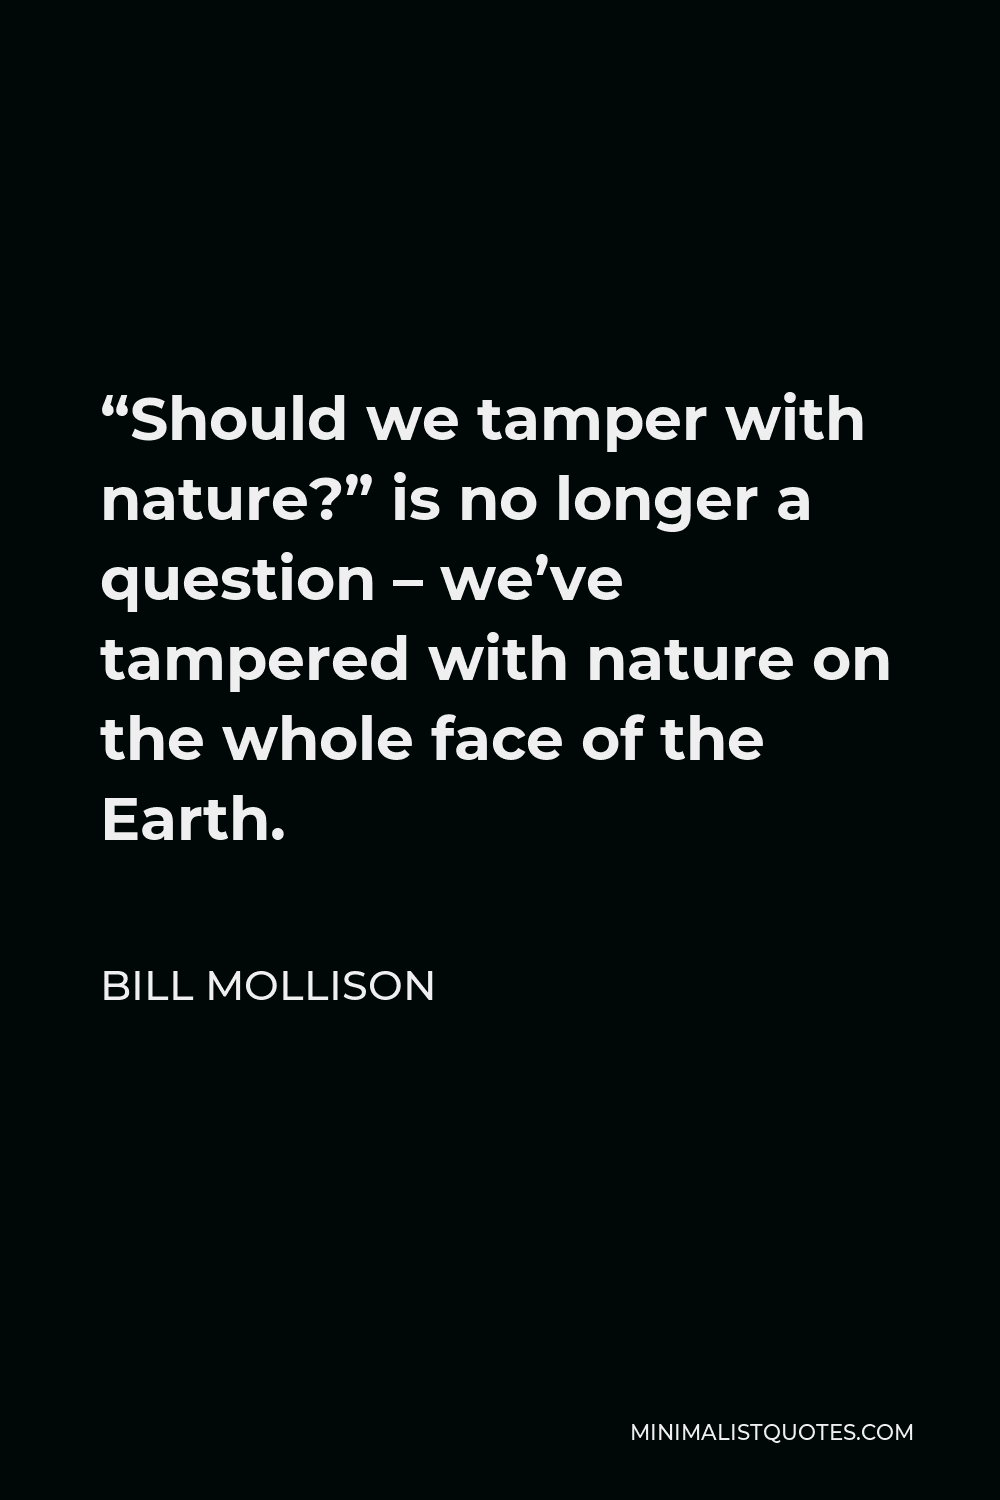 Bill Mollison Quote - “Should we tamper with nature?” is no longer a question – we’ve tampered with nature on the whole face of the Earth.